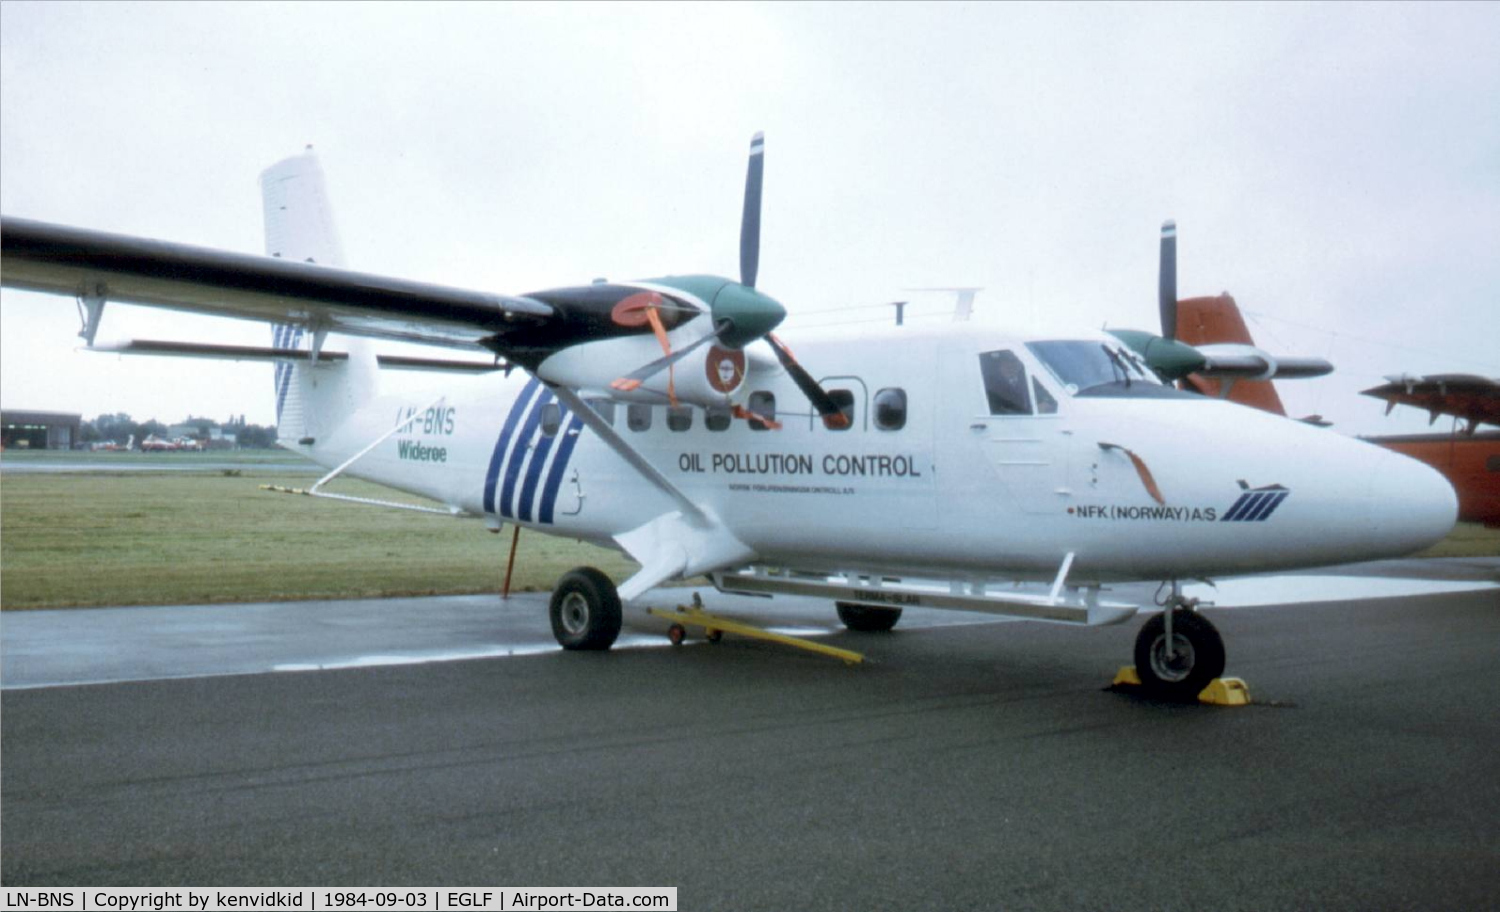 LN-BNS, 1977 De Havilland Canada DHC-6-300 Twin Otter C/N 536, At the 1984 Farnborough International Air Show. Scanned from slide.